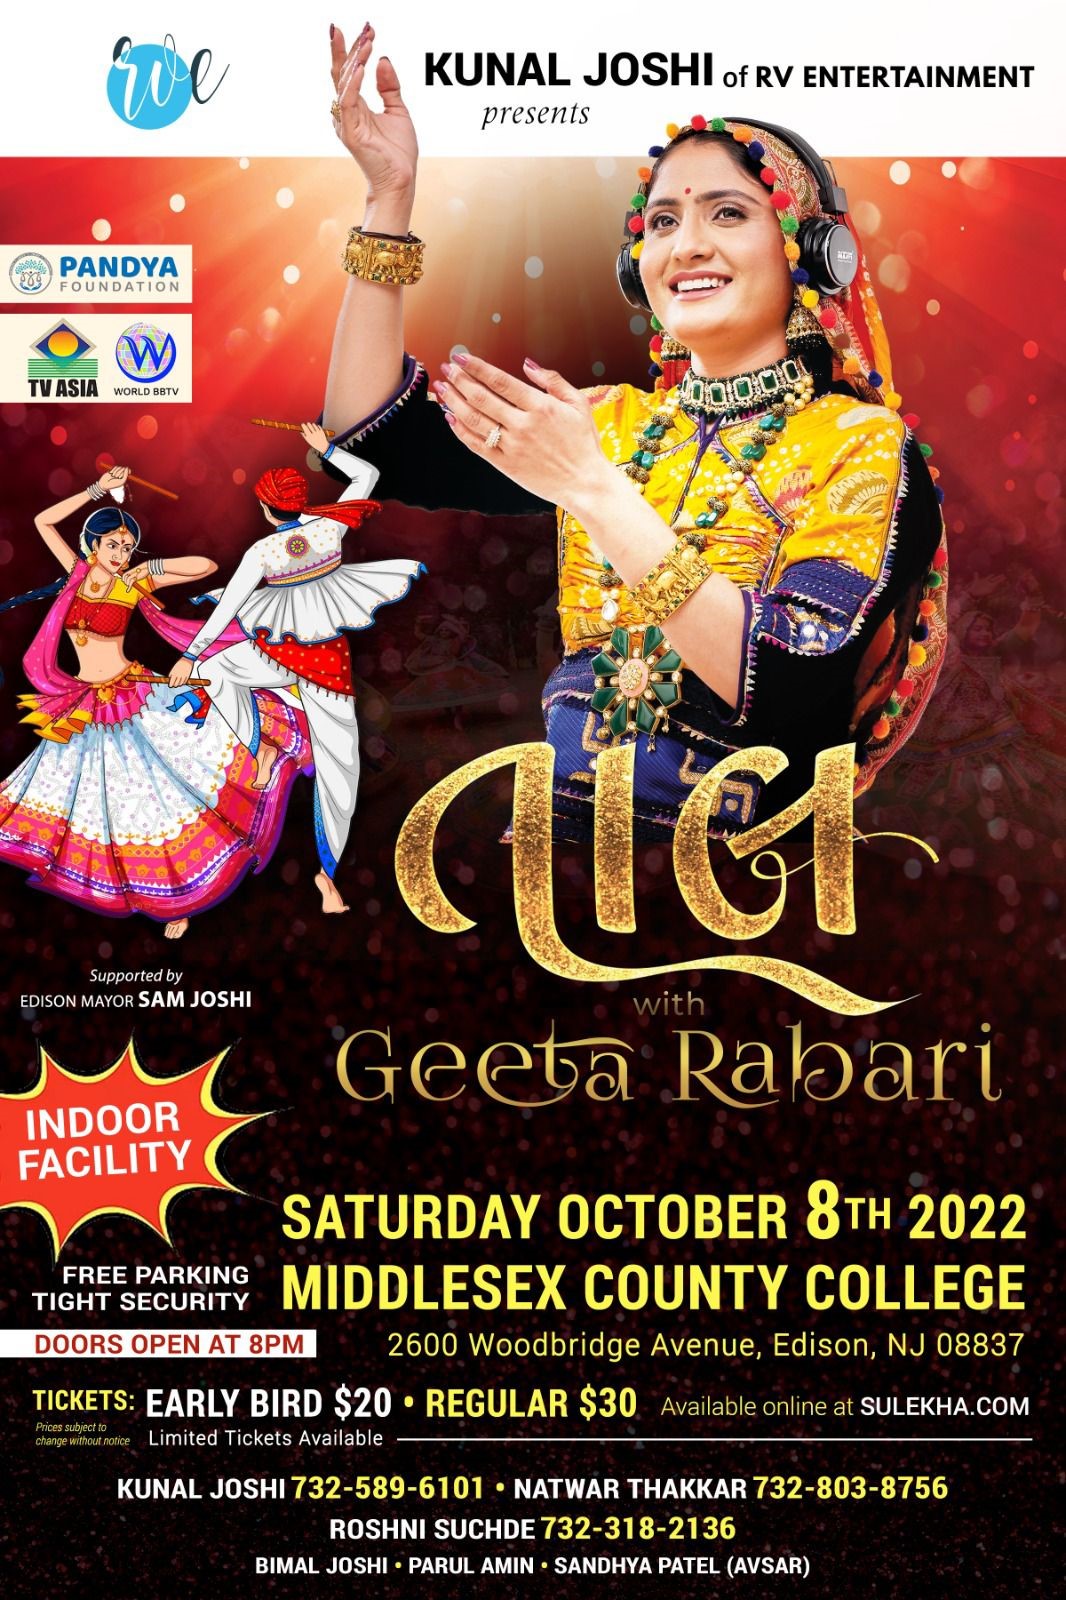 Geeta Rabari Garba at Middlesex County College Saturday October 8th, 2022 Taal with Geeta Rabari on oct. 08, 20:00@Middlesex county college Edison NJ - Buy tickets and Get information on Desi Events desievents.org